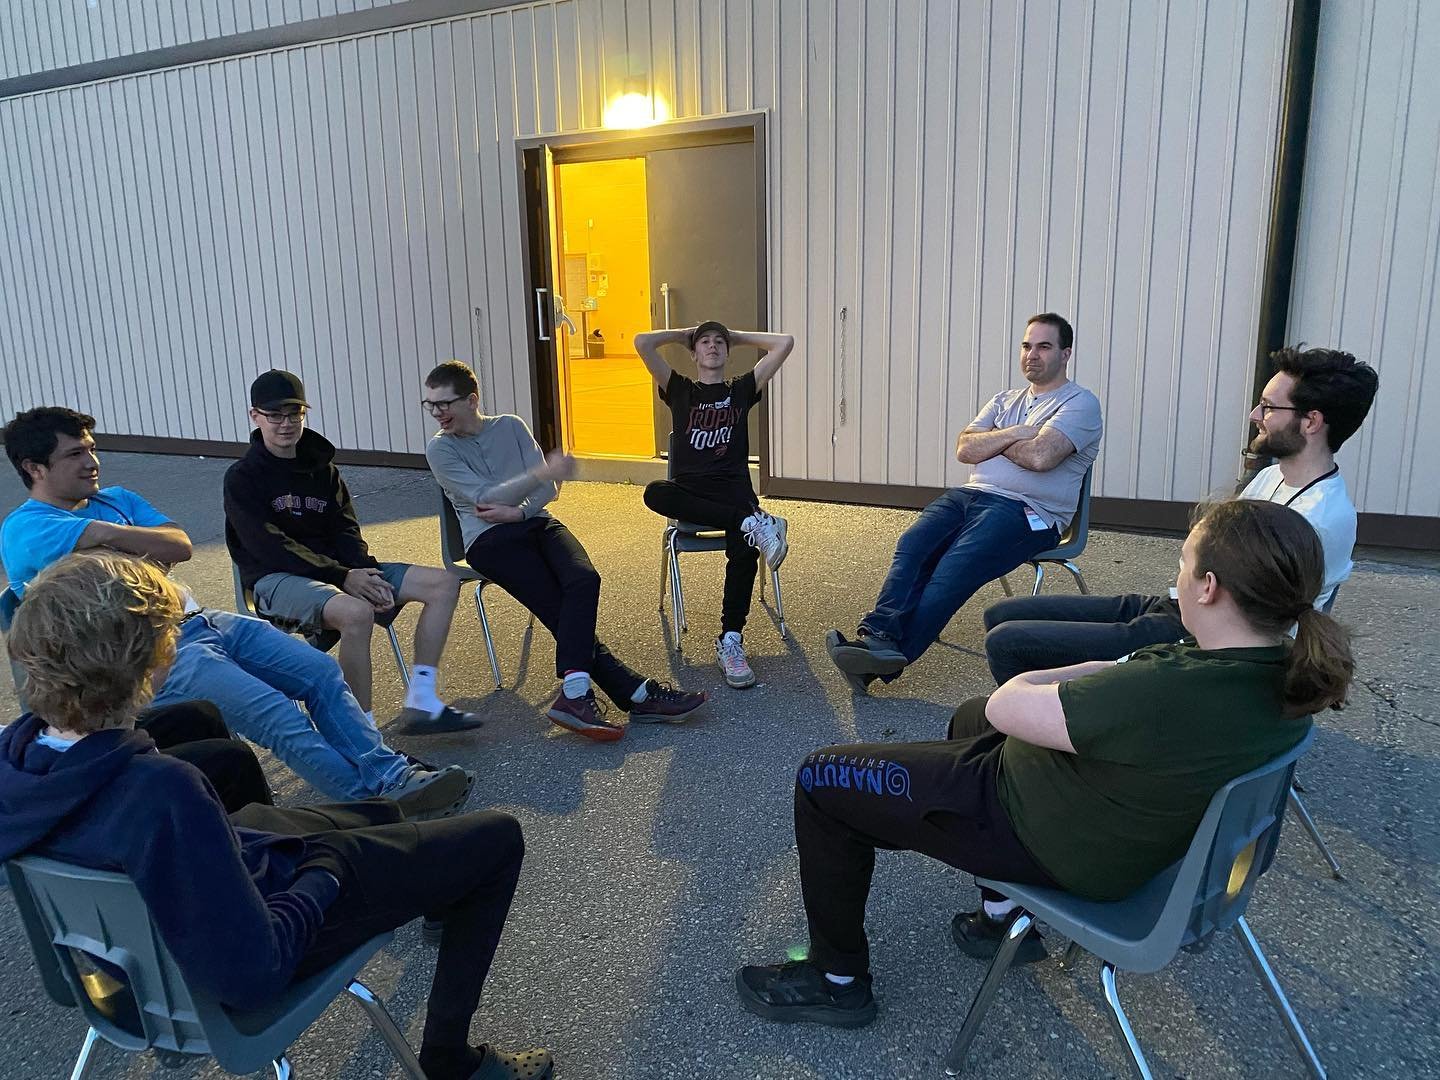 Learning and life change happens over time, in community, through the Holy Spirt. That&rsquo;s why small group time is (in my opinion) the most important part of our youth program. 

For an hour each week, our students connect with our volunteers, pl